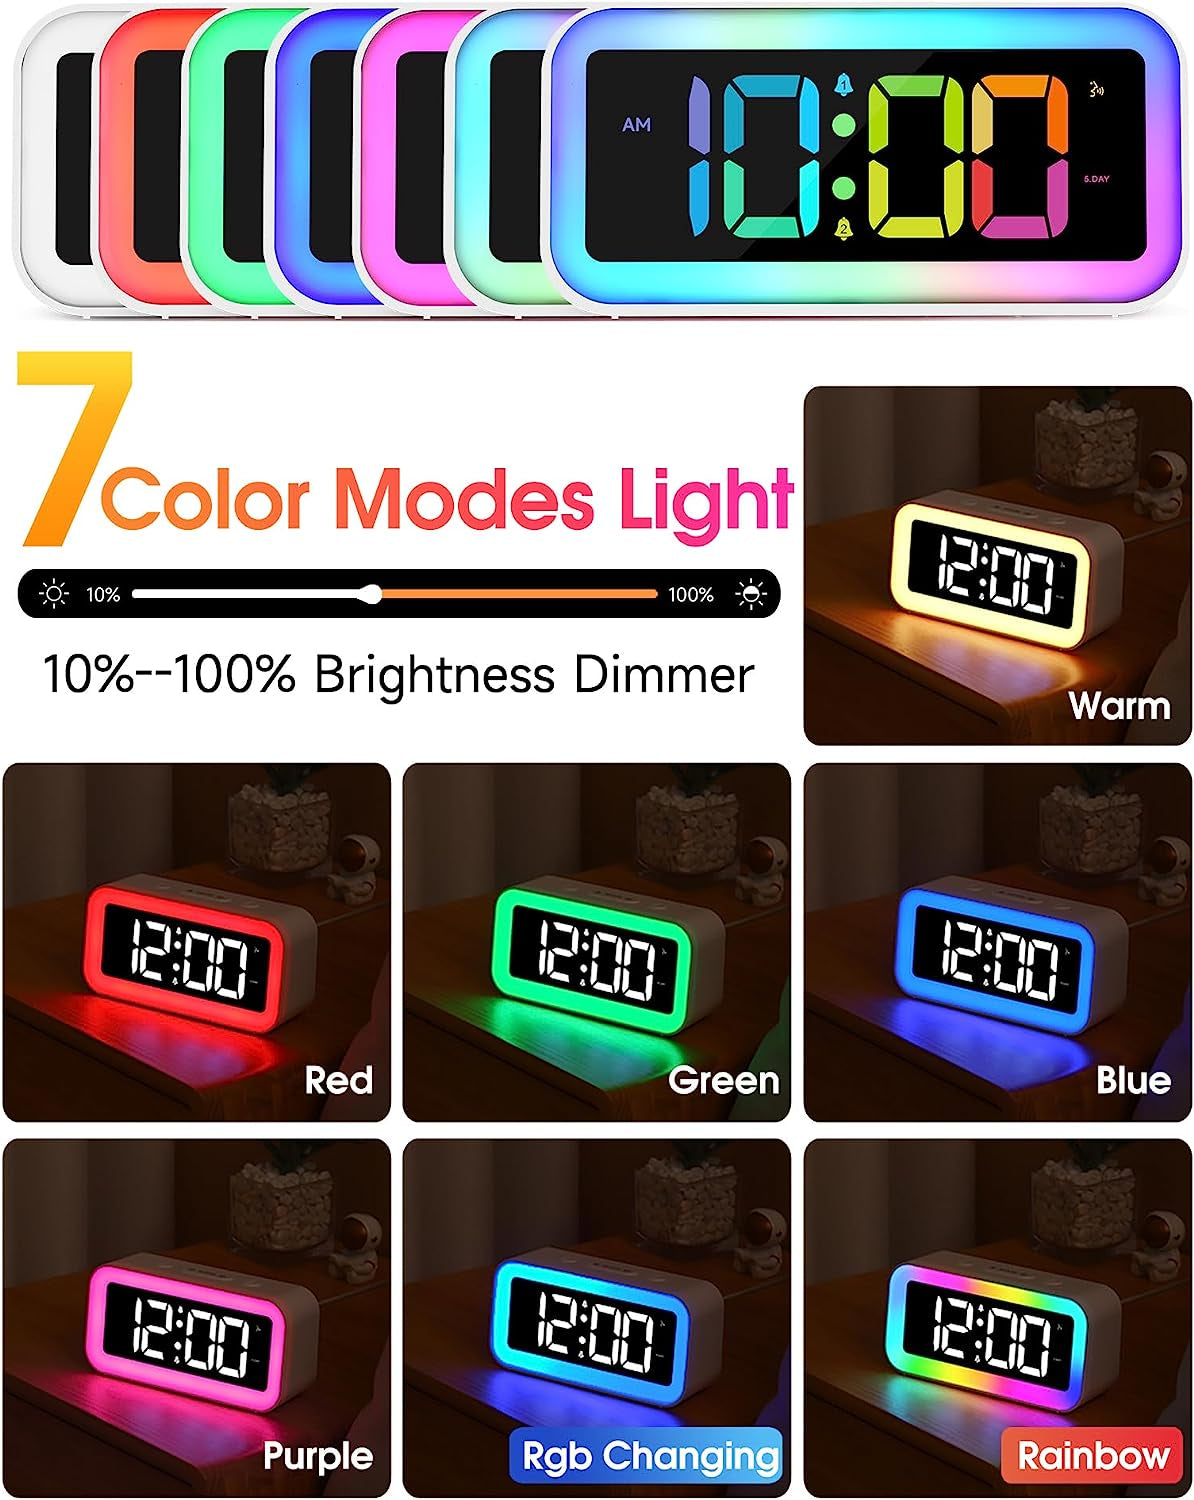 Loud Alarm Clock for Bedrooms with Dynamic RGB Night Light,Heavy Sleepers Adults,Dual Alarm,Dimmer,Usb Charger,Small Bedside Digital Clock with Led Display for Kids,Teens,Seniors (White)